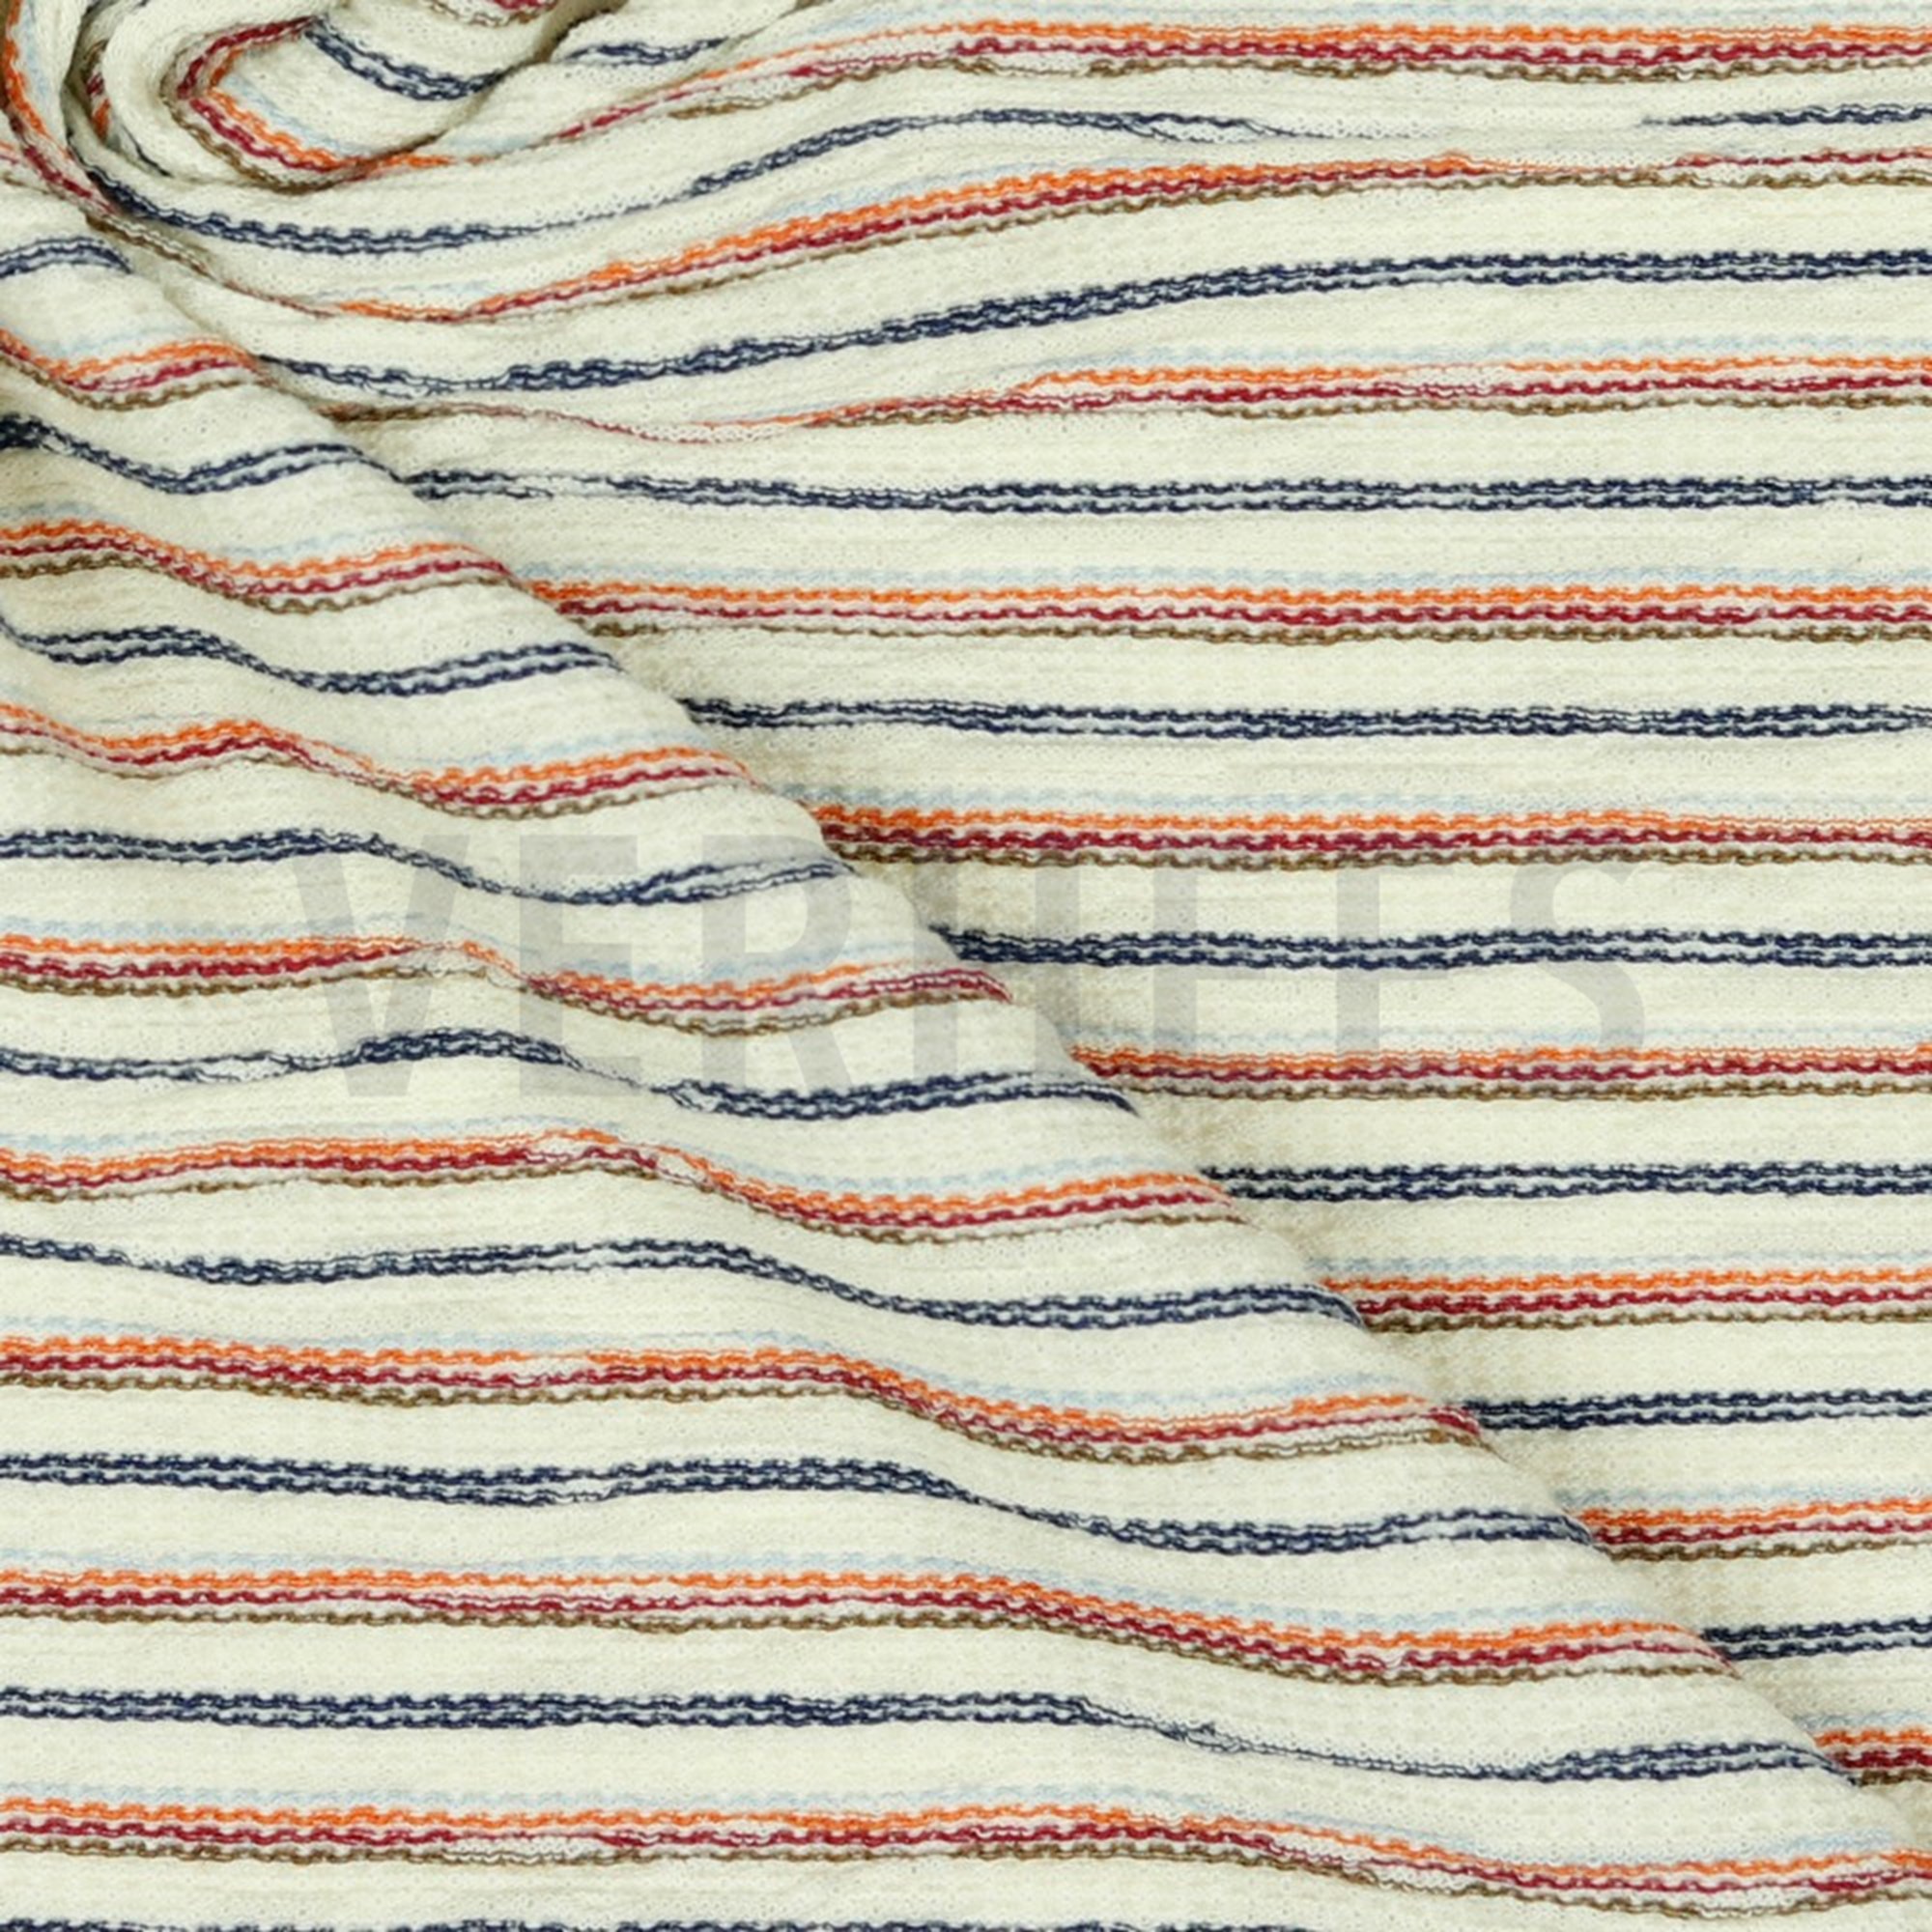 YARN DYED KNITTED STRIPE MULTICOLOUR (high resolution) #3